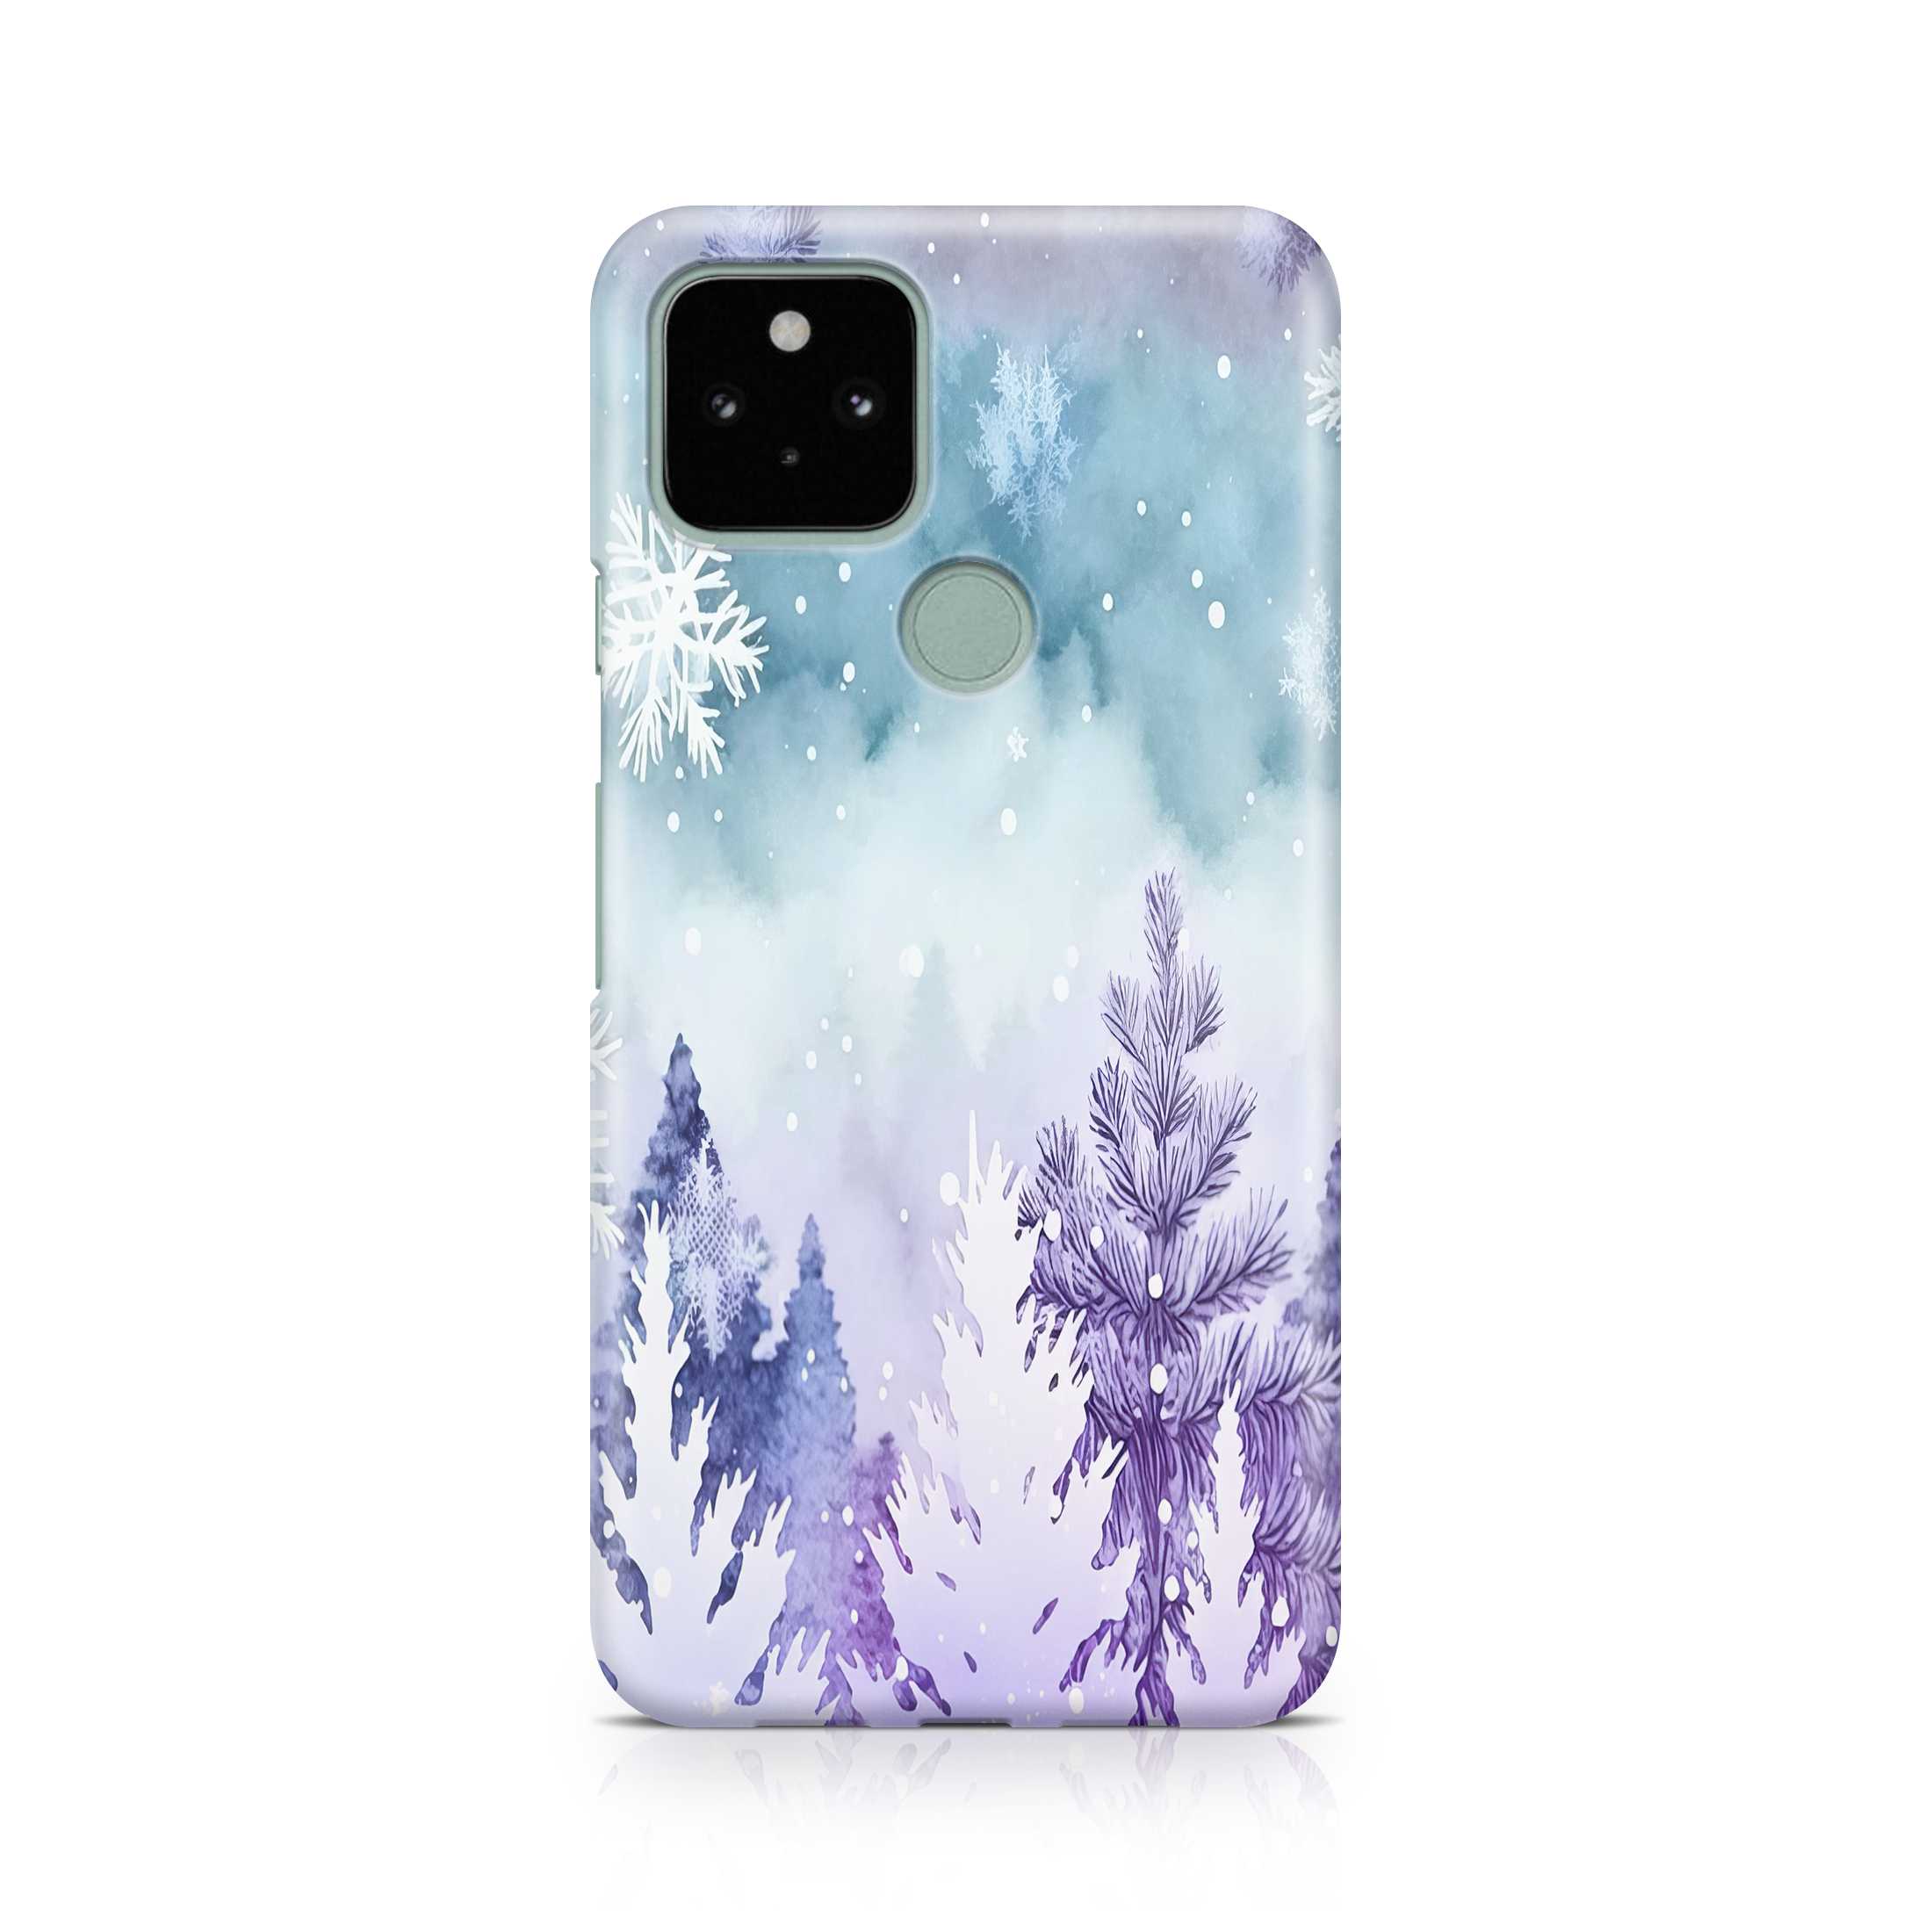 Quiet Snowfall - Google phone case designs by CaseSwagger